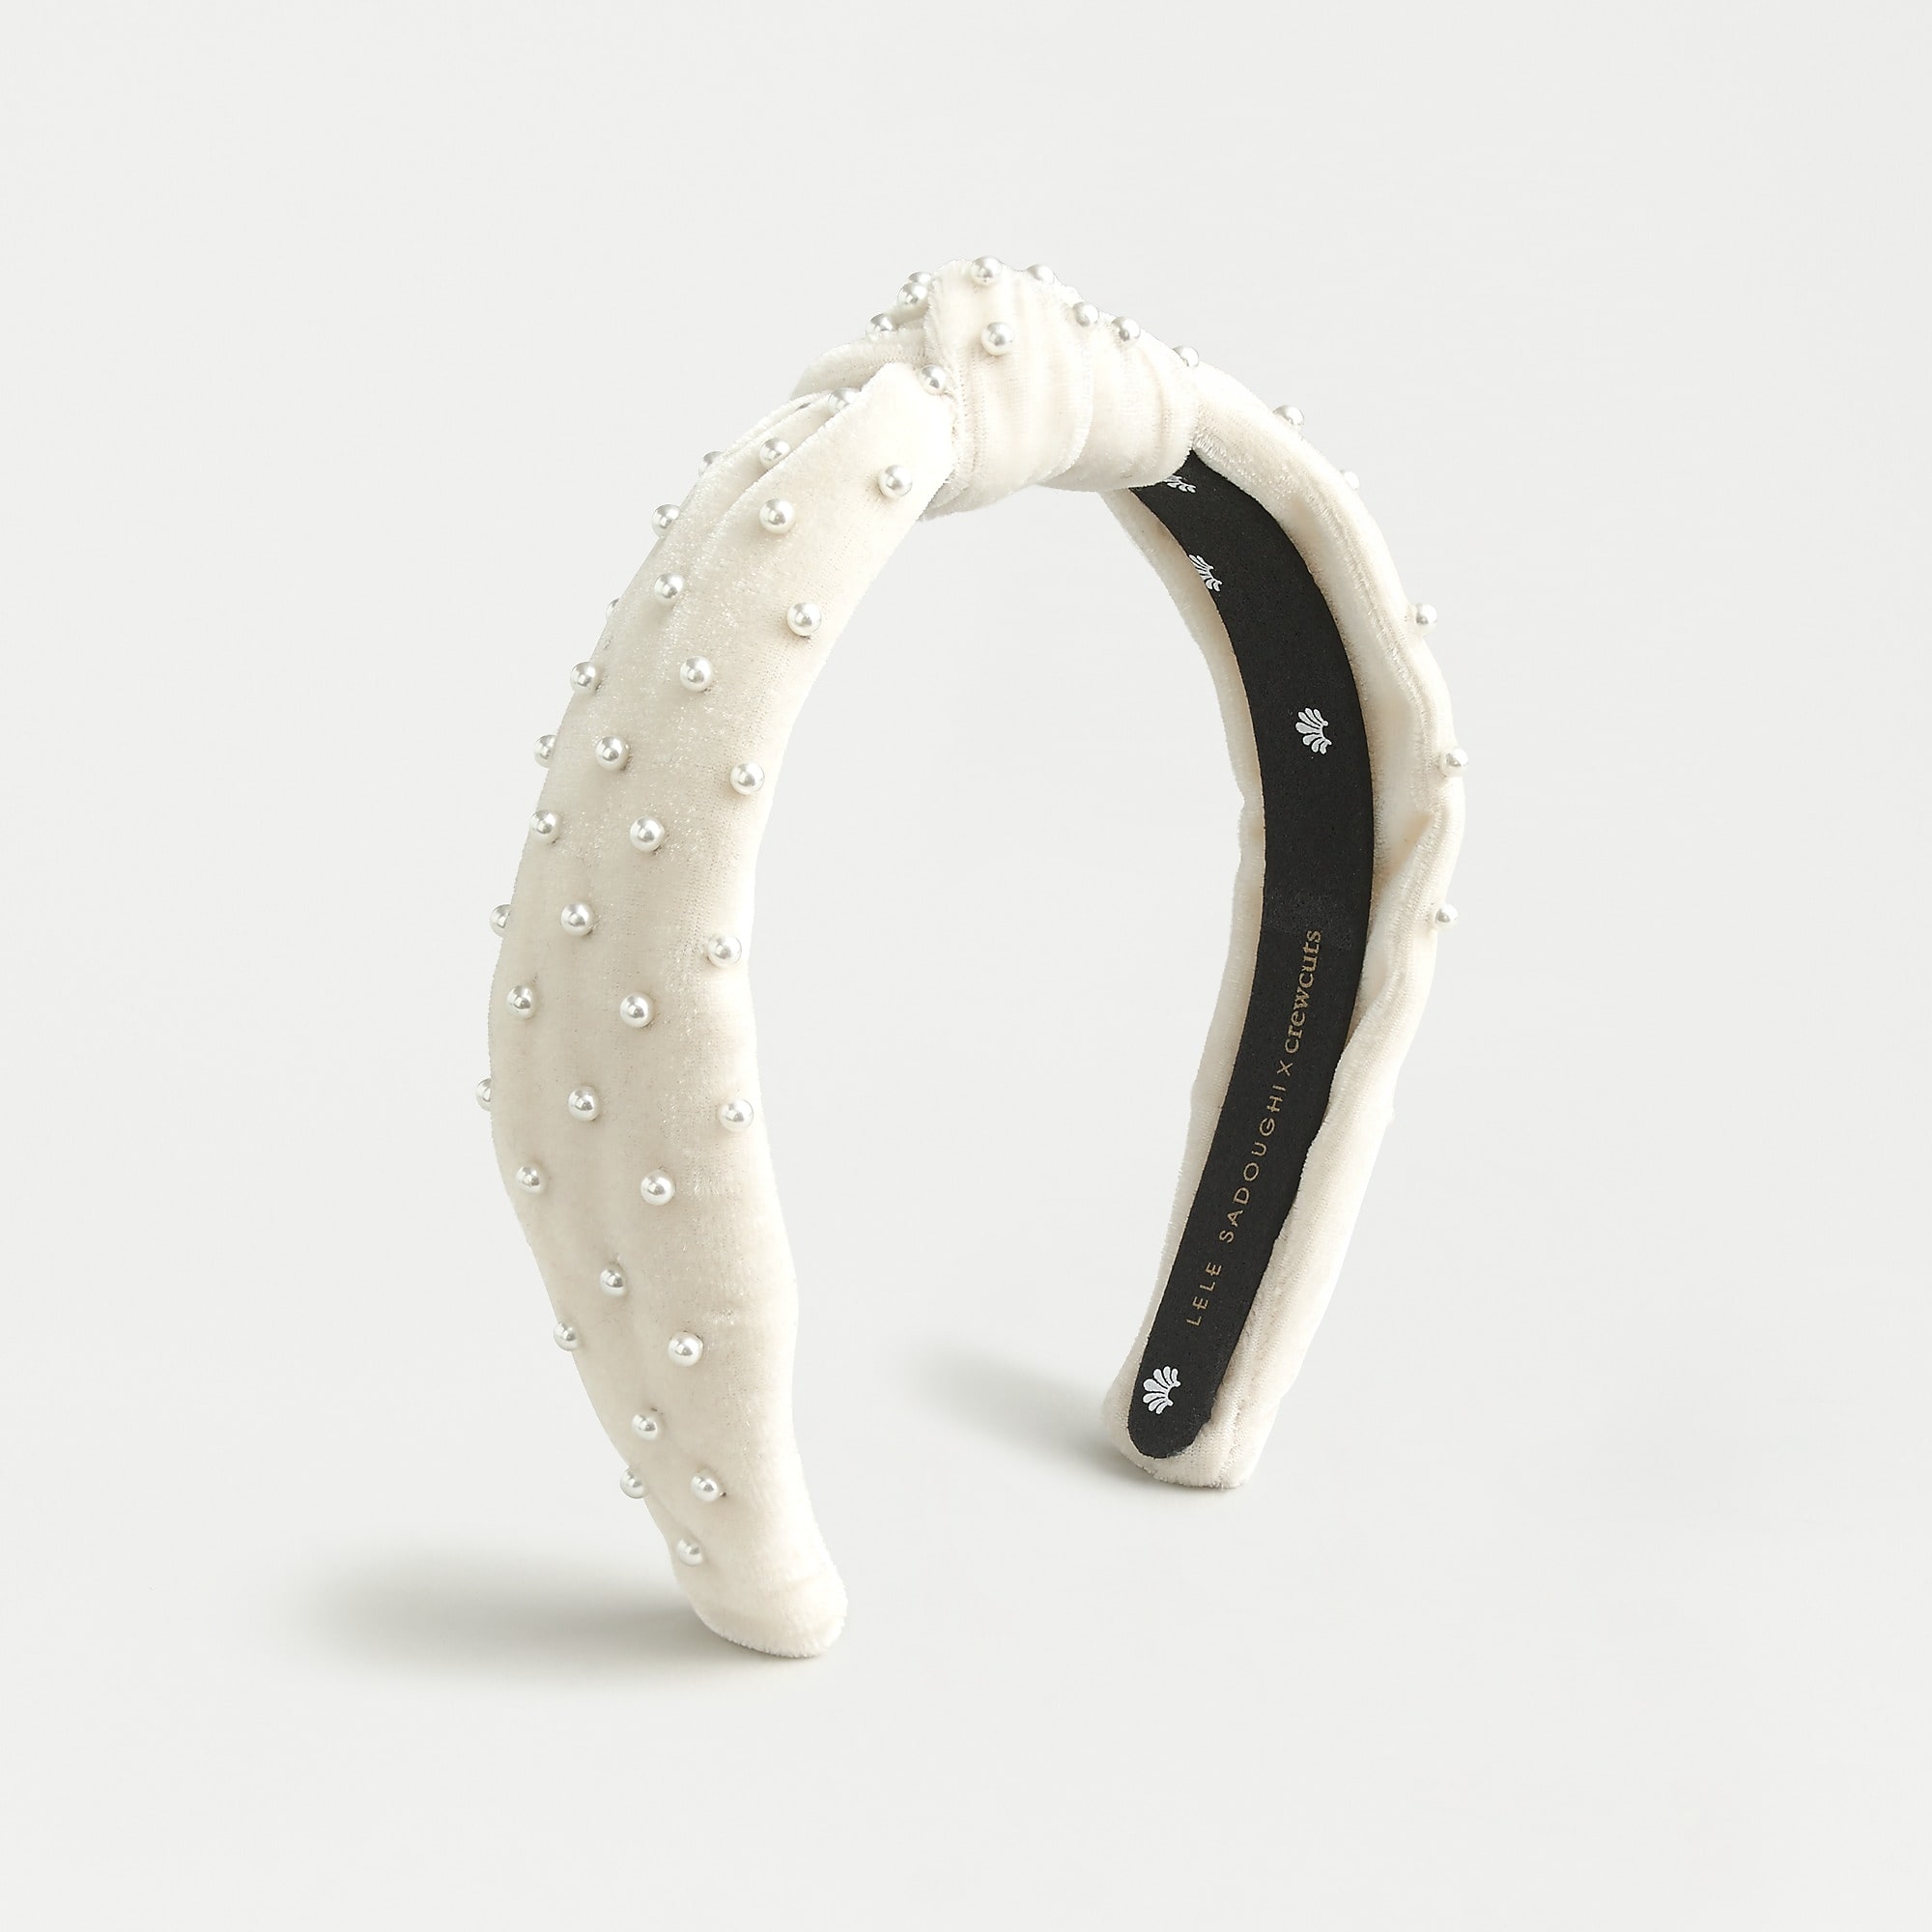 Girls’ Lele Sadoughi X crewcuts knot headband in ivory velvet with pearls